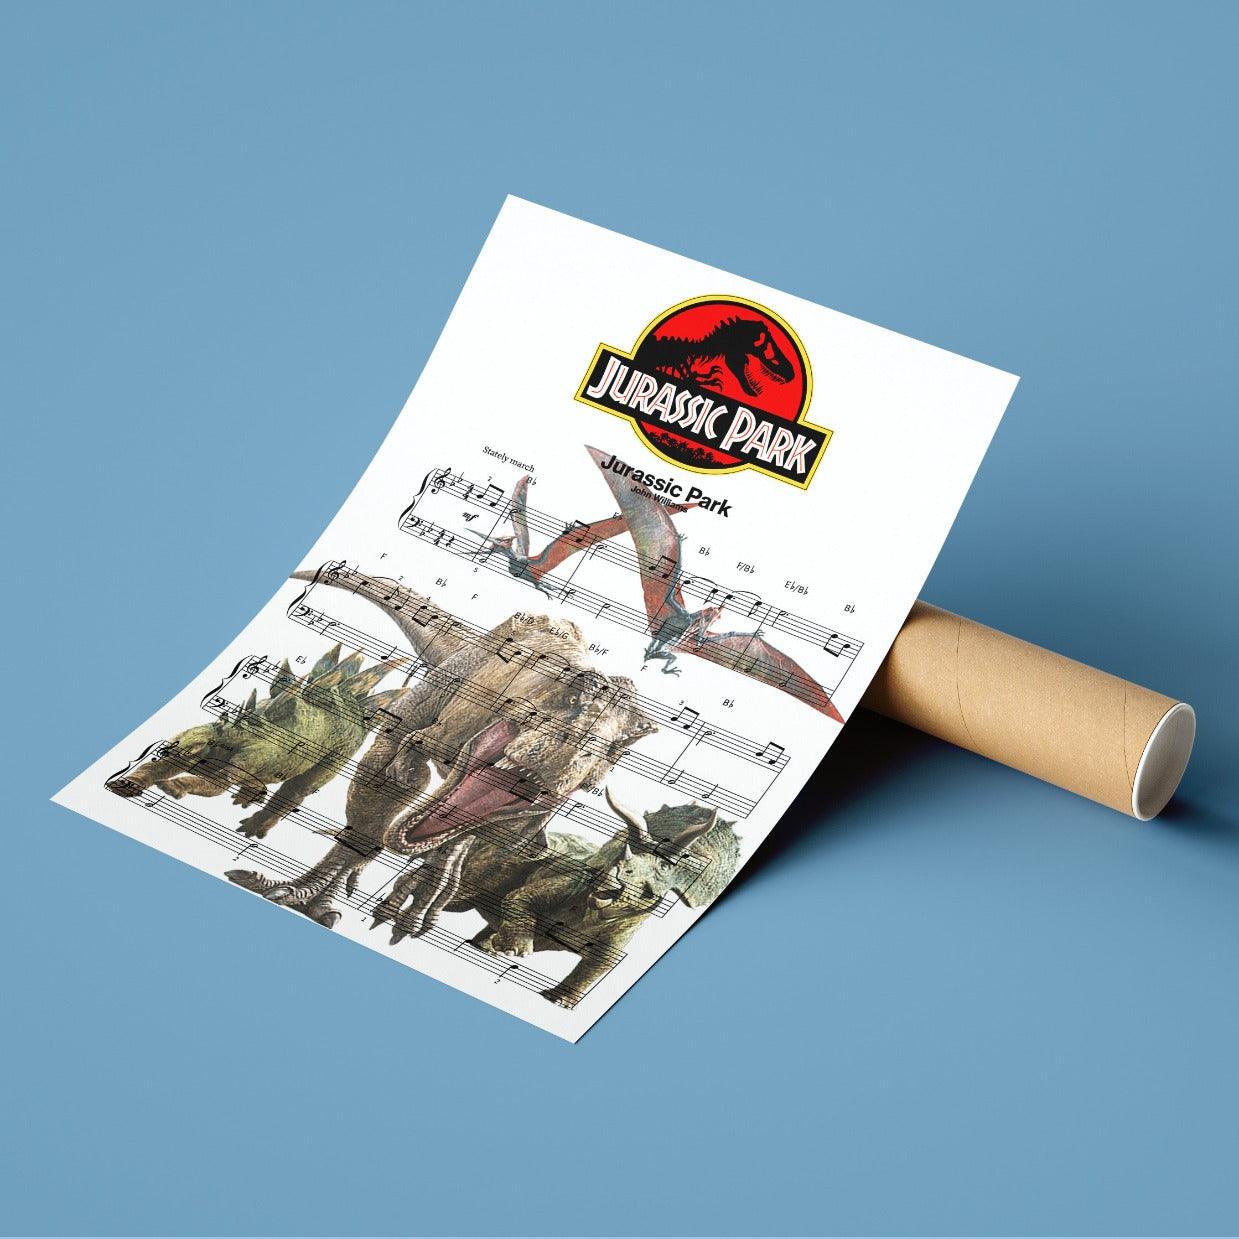 Limited edition print of the theme from Jurassic Park composed by John Williams. Available in A5, A4 or A3